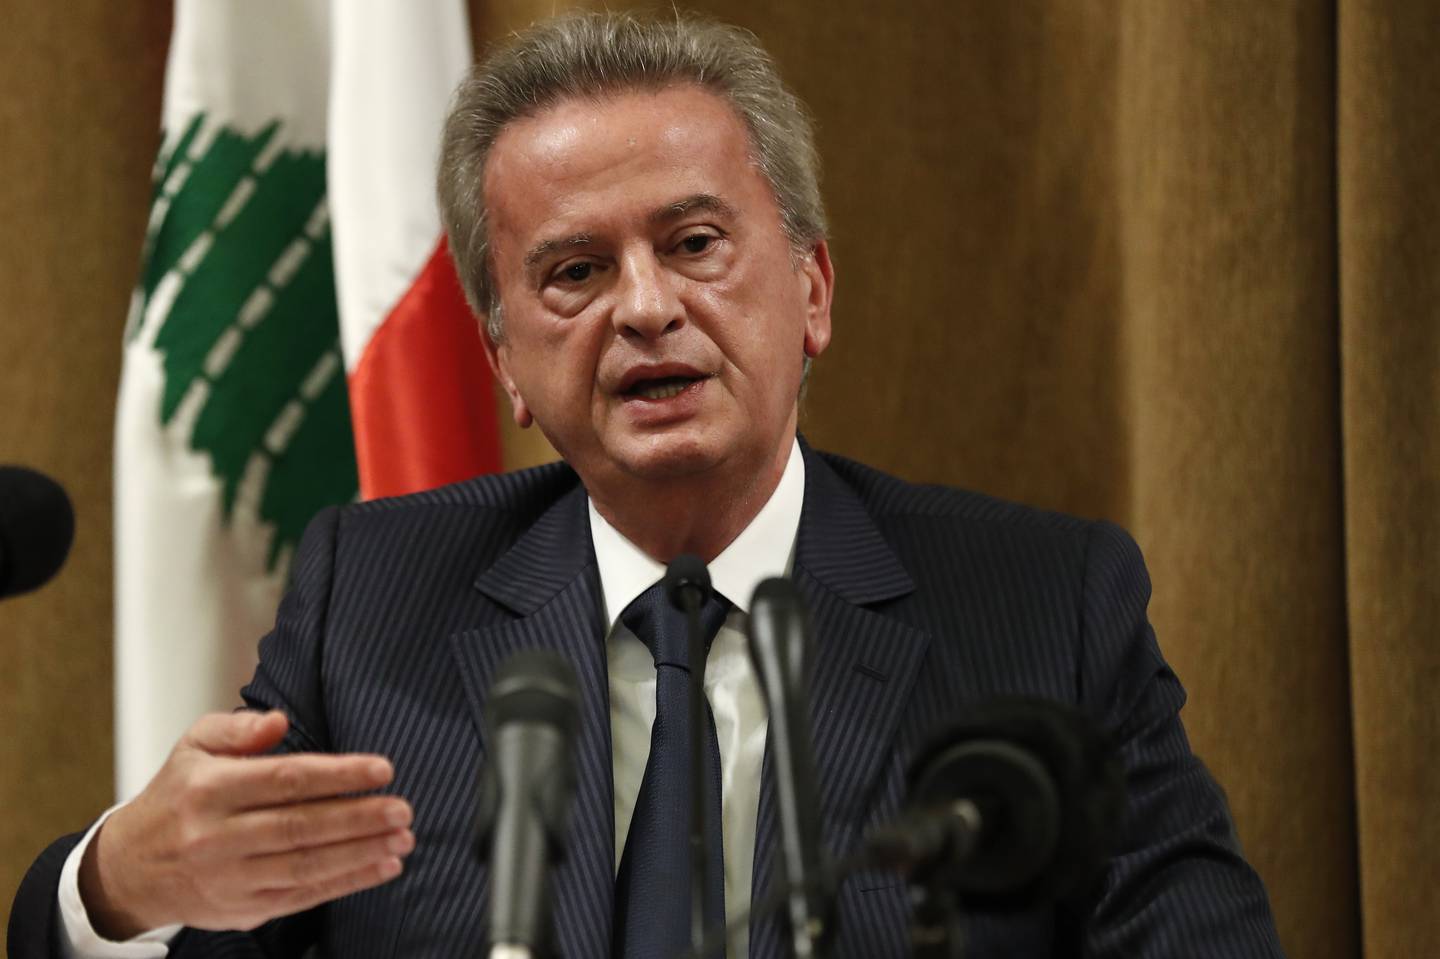 Riad Salameh, governor of Lebanon's Central Bank, who accepted a Finance Ministry request for an inventory on Lebanon's gold reserves in the mid-2020, according to sources. AP